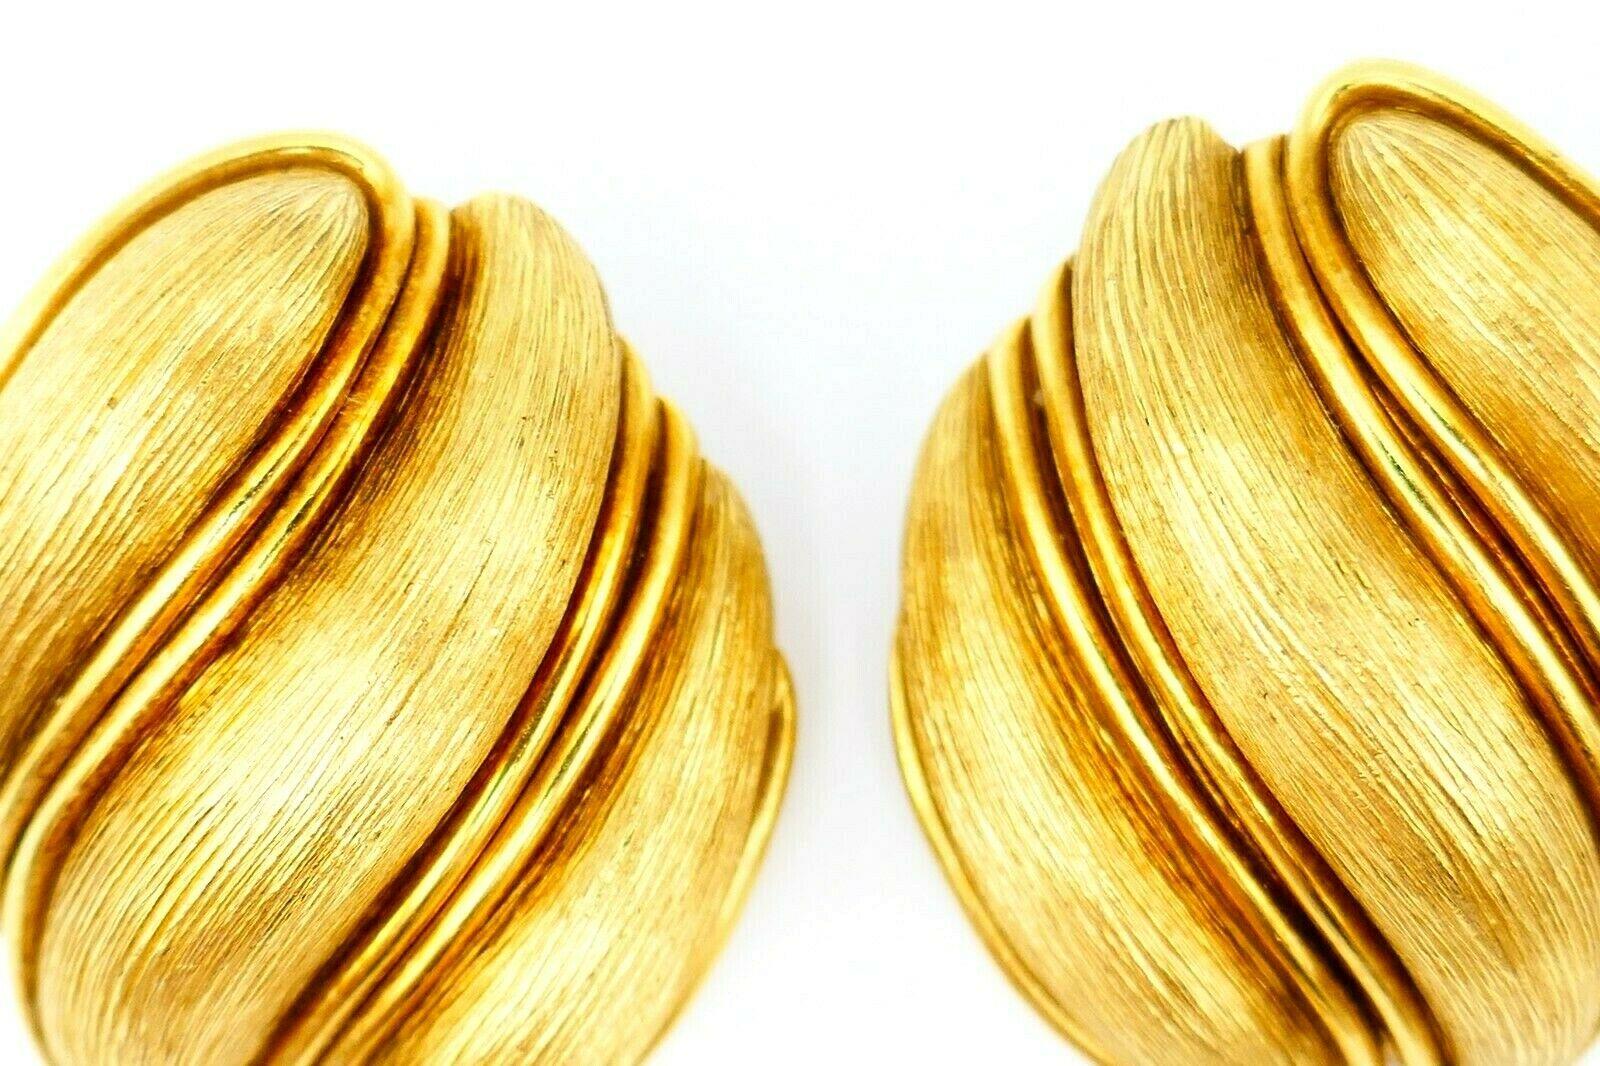 An amazing pair of clip-on earrings by Henry Dunay. Made of textured 18k yellow gold.
Stamped with Dunay maker's mark and a hallmark for 18k gold. 
Measurements: 1 1/8